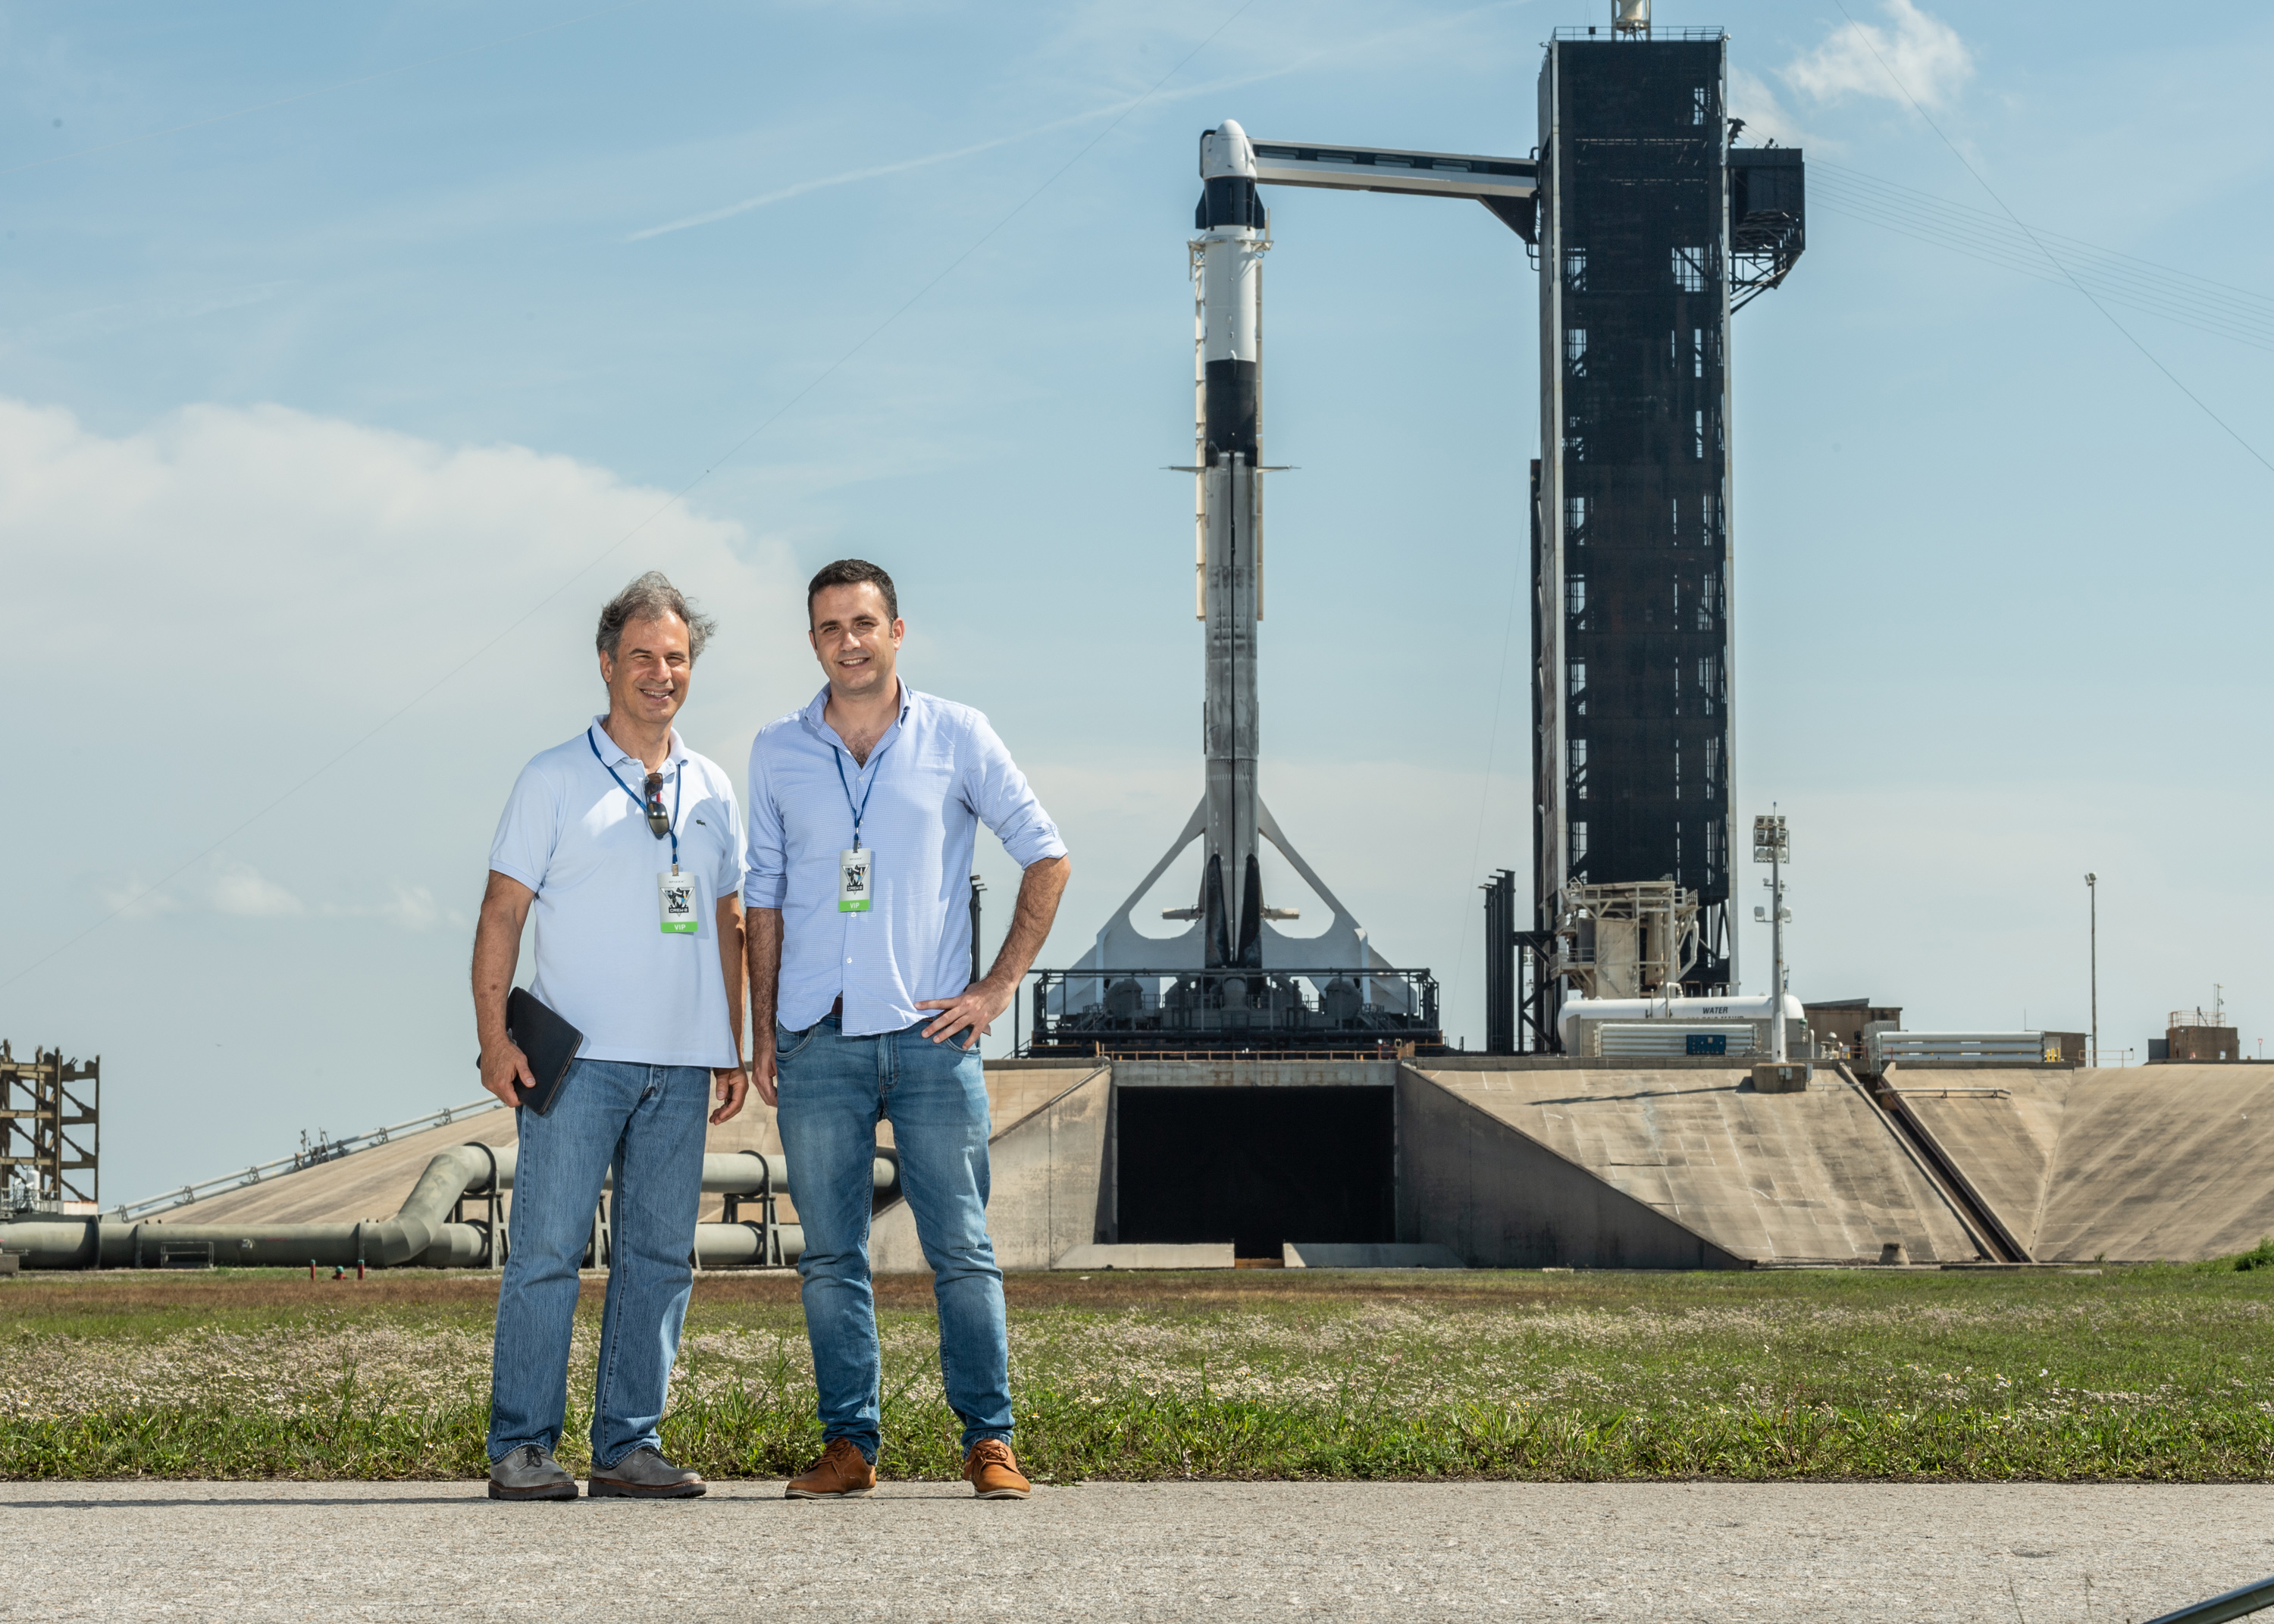 Ax-1 astronaut Eytan Stibbe (left) and Ramon Foundation director Ran Live stand next to the SpaceX Falcon 9 rocket and Dragon capsule to introduce the Ax-1 mission from Kennedy Space Center’s Pad 39A on April 8, 2022.